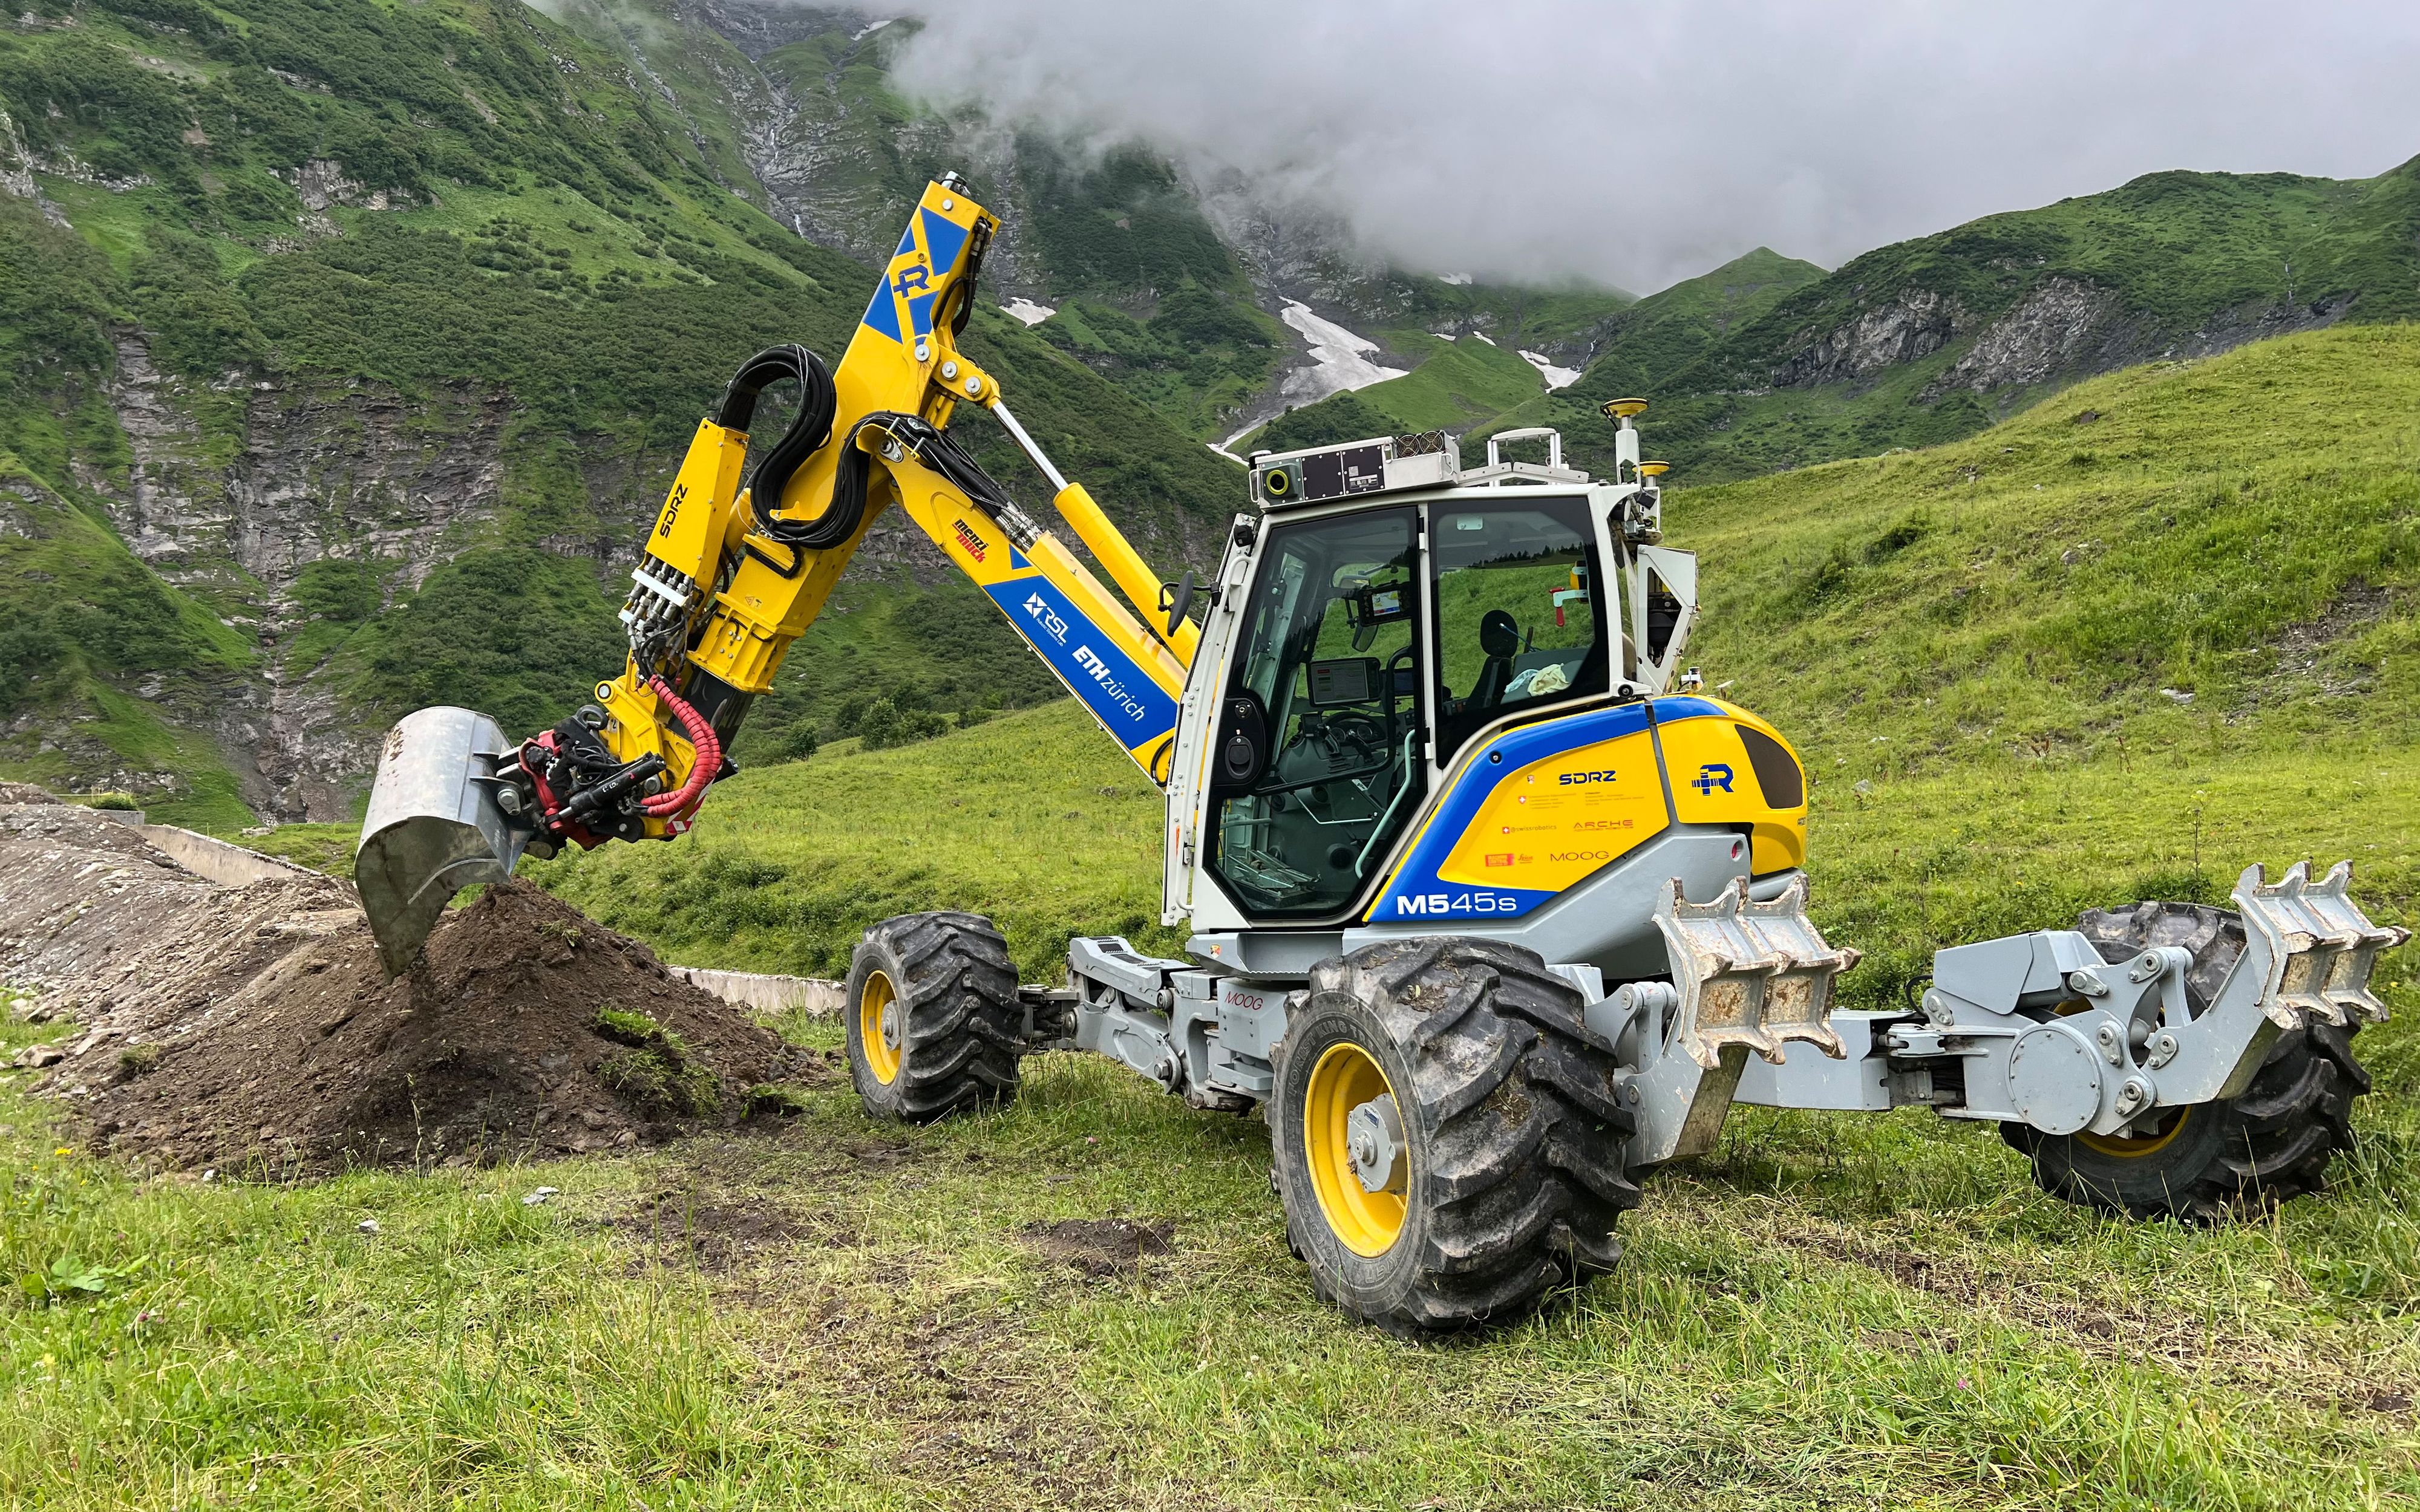 An unmanned, yellow excavator, which is operated by remote control and is in the process of dig-ging a trench. Nature can be seen in the background. 